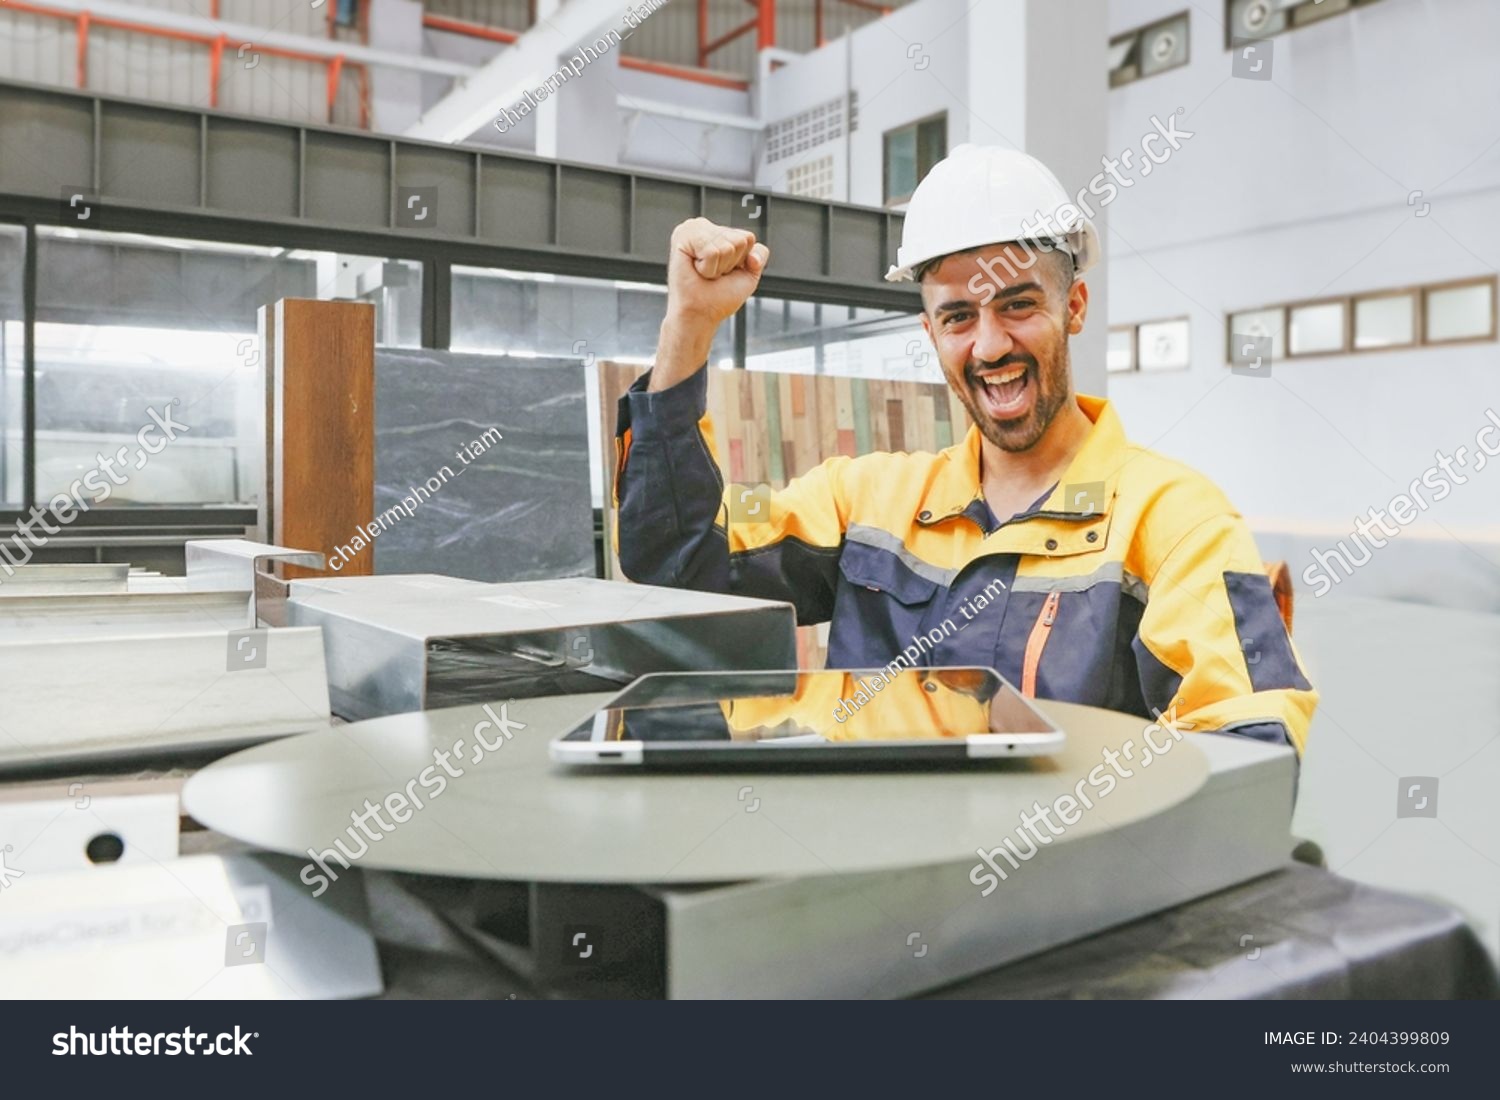 Male spanish worker technician with smile happy and having fun working in factory industrial company sitting with fist raised positive attitude strong and confident looking at camera factory office. #2404399809